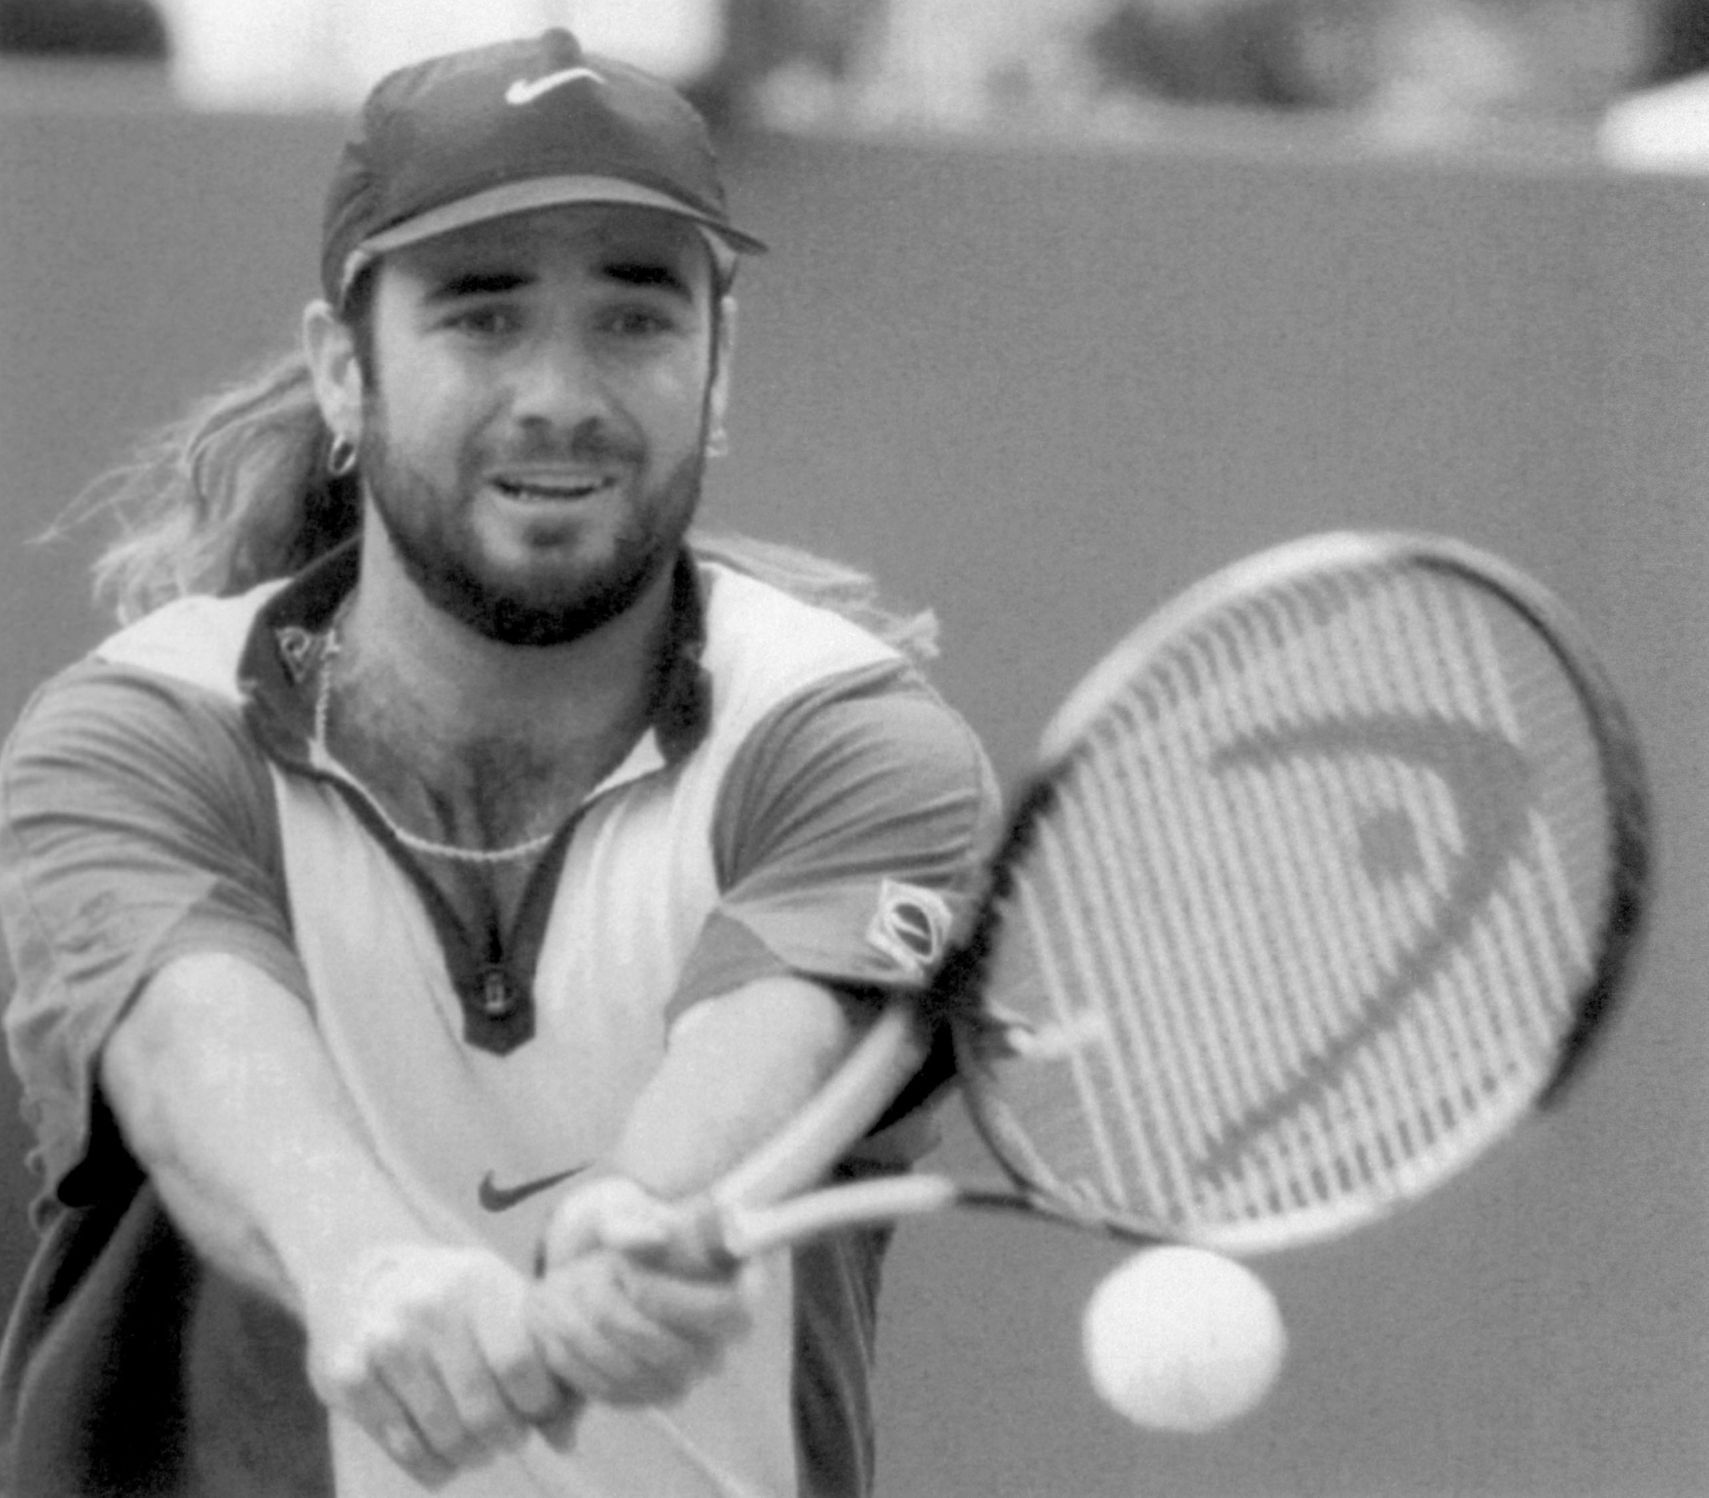 André Agassi - US Open 1994